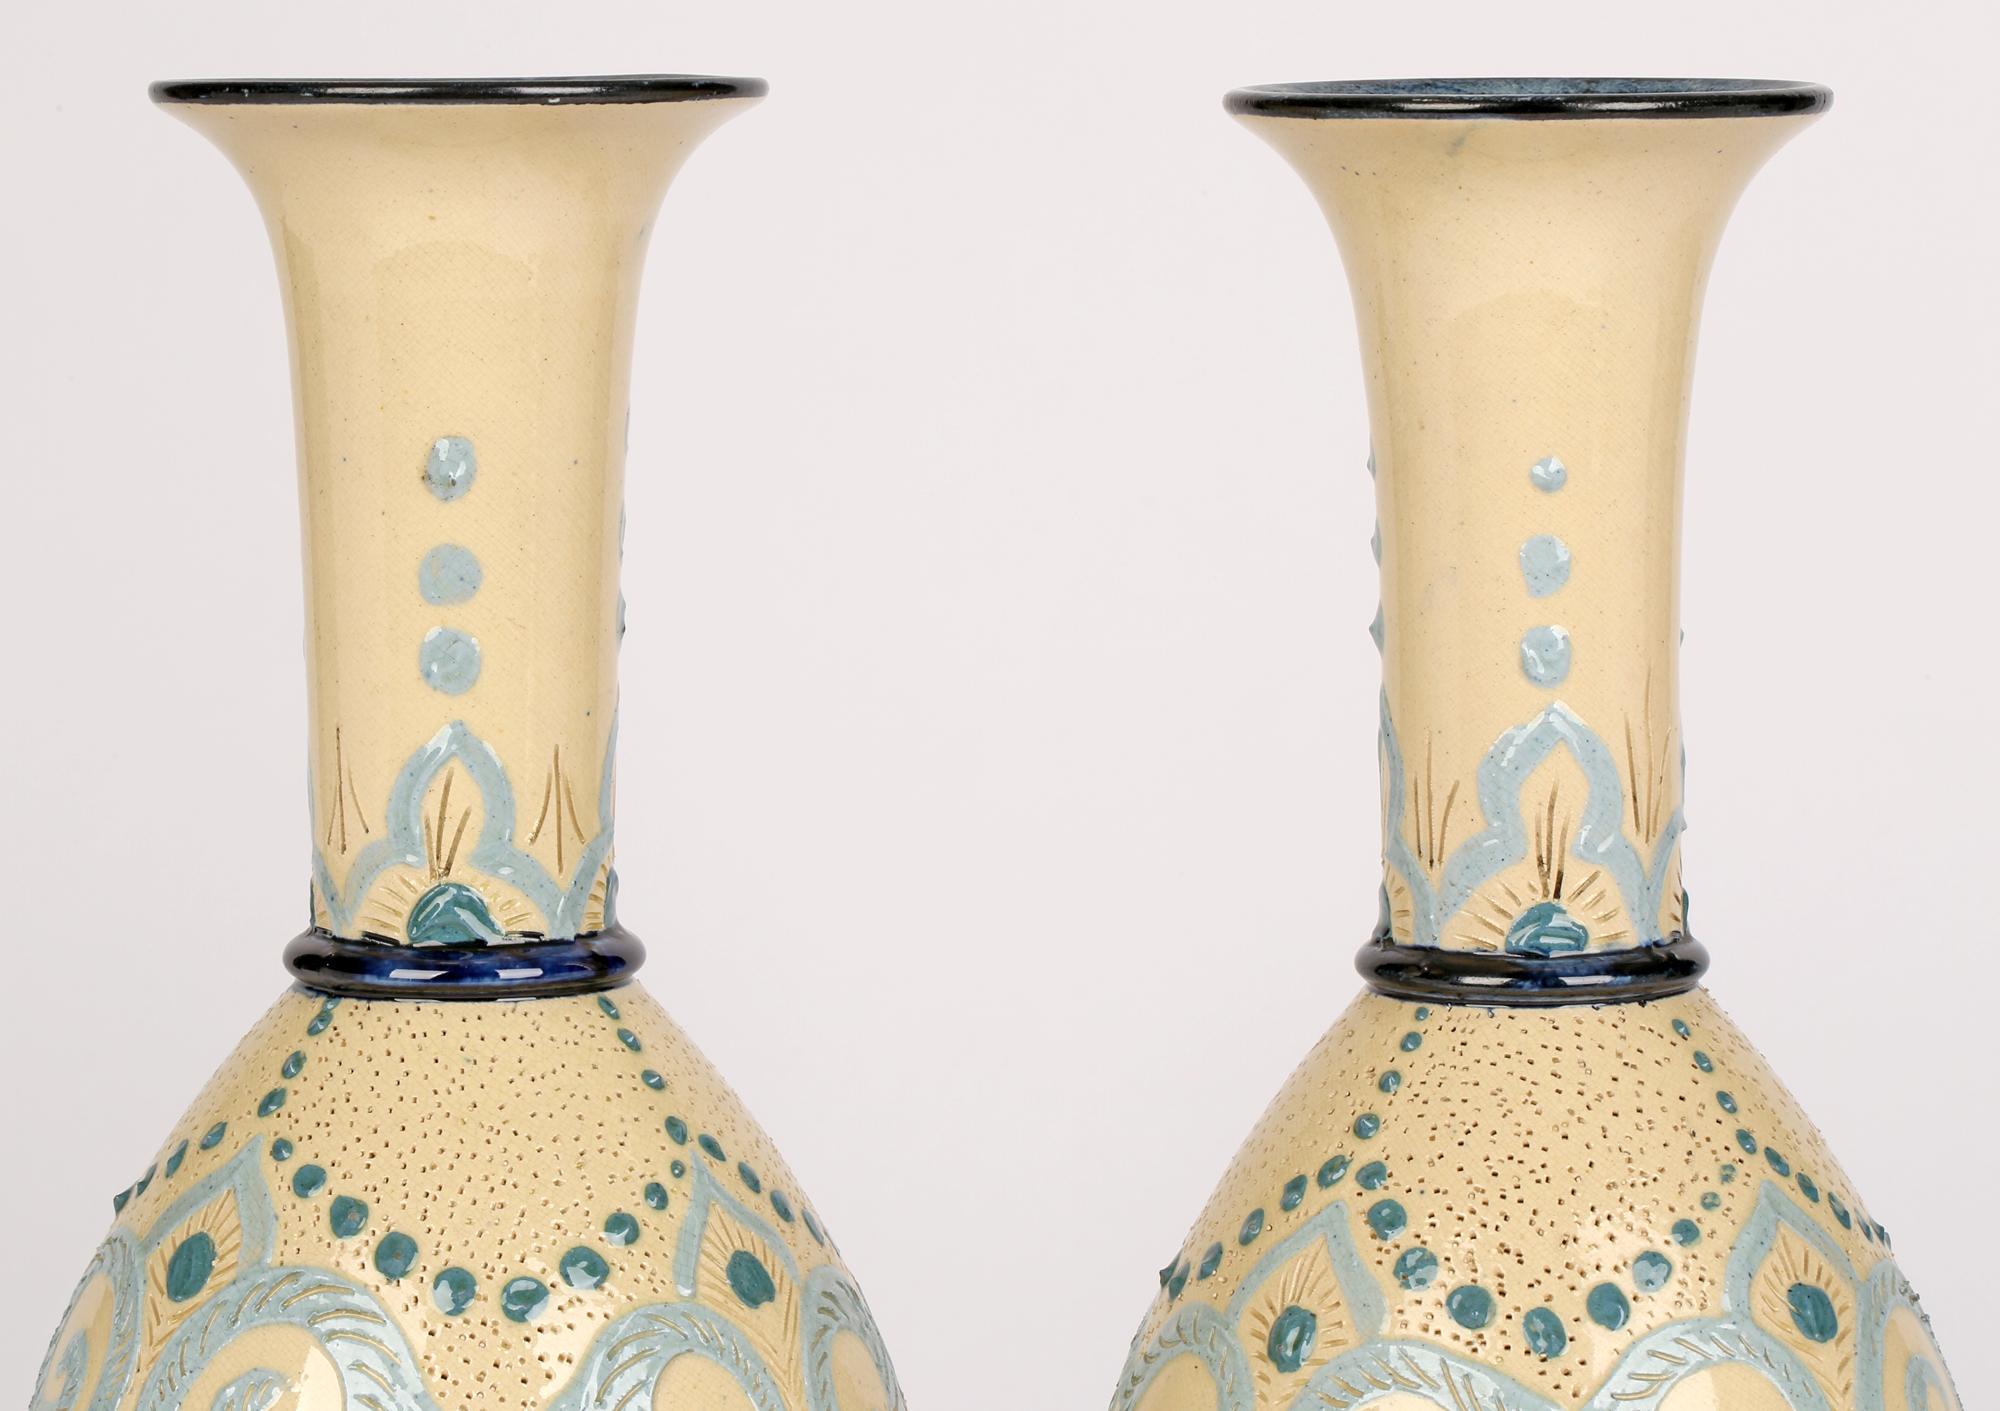 An exceptionally rare Doulton Lambeth Impasto pair of bottle vases marked Arrabian by F M Collins (Mrs Vale) dated 1879. 

F M Collins was a Faience Department artist and a pioneer in the field of Impasto painting, the successful launching of